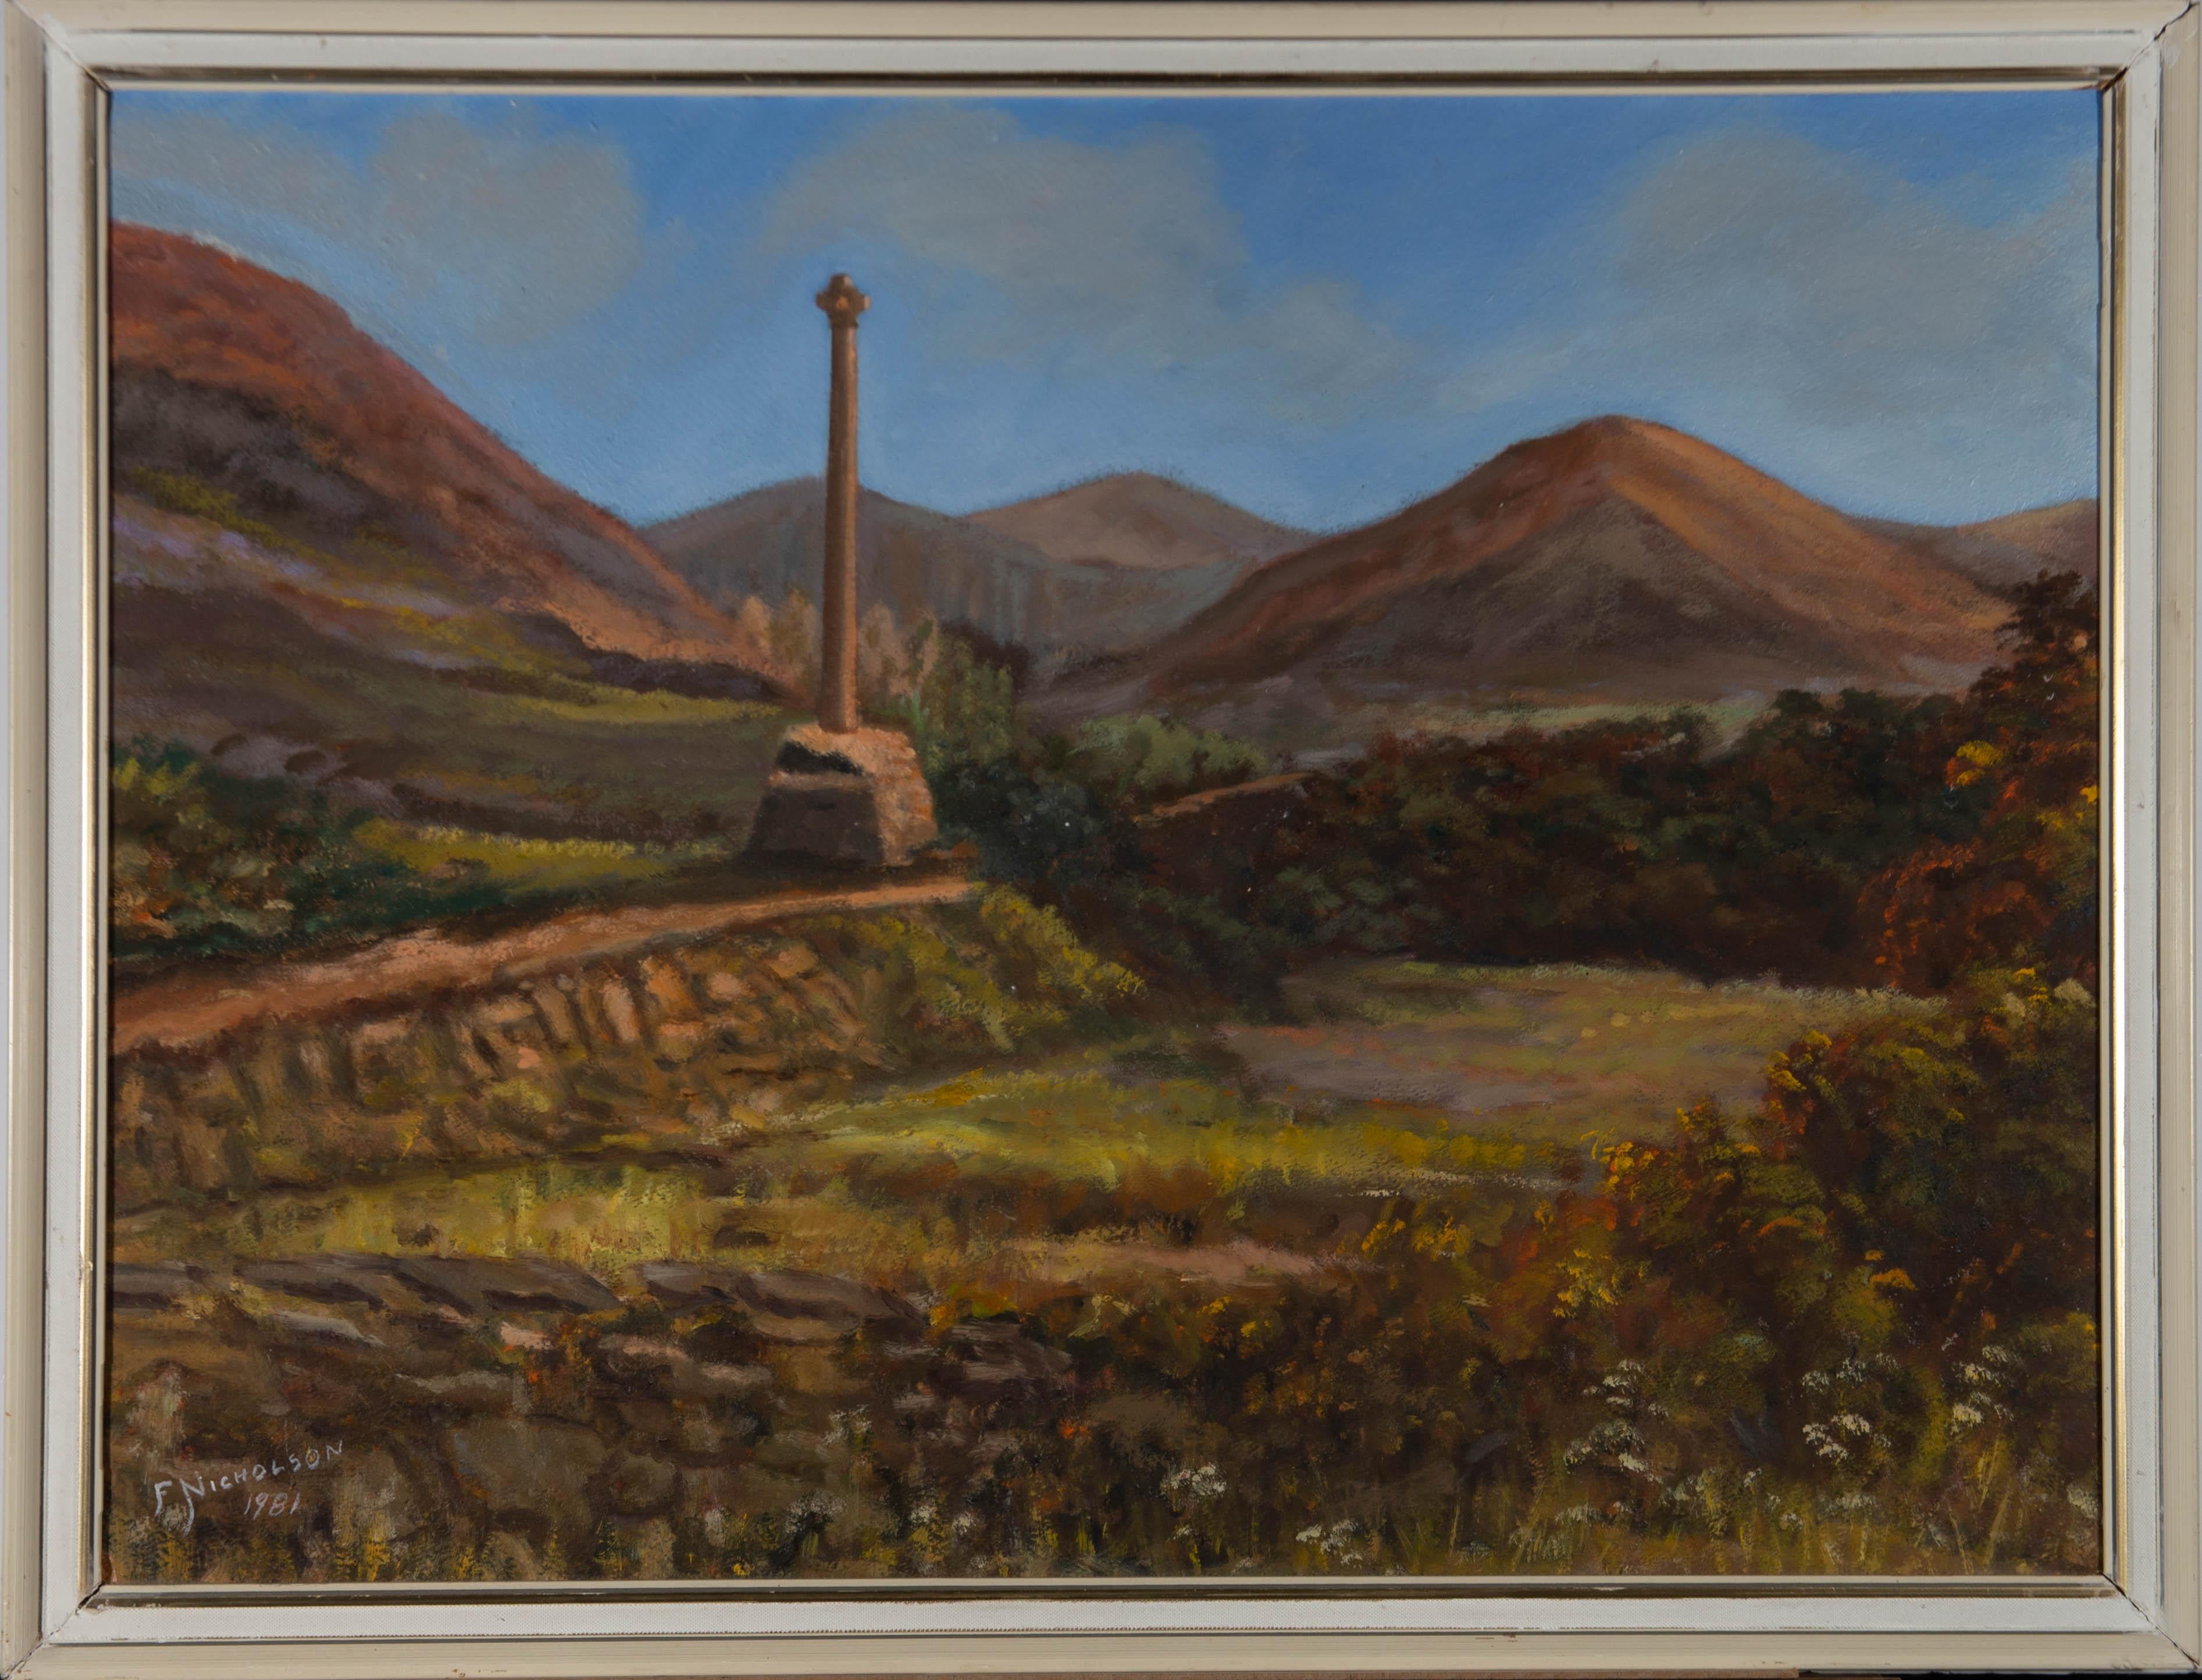 A serene highland scene shown on a sunny afternoon, we can see the massacre of Glencoe monument that was put in place following the Jacobite uprising on the left amongst the mountainous landscape. Well presented in a white frame with linen slip.